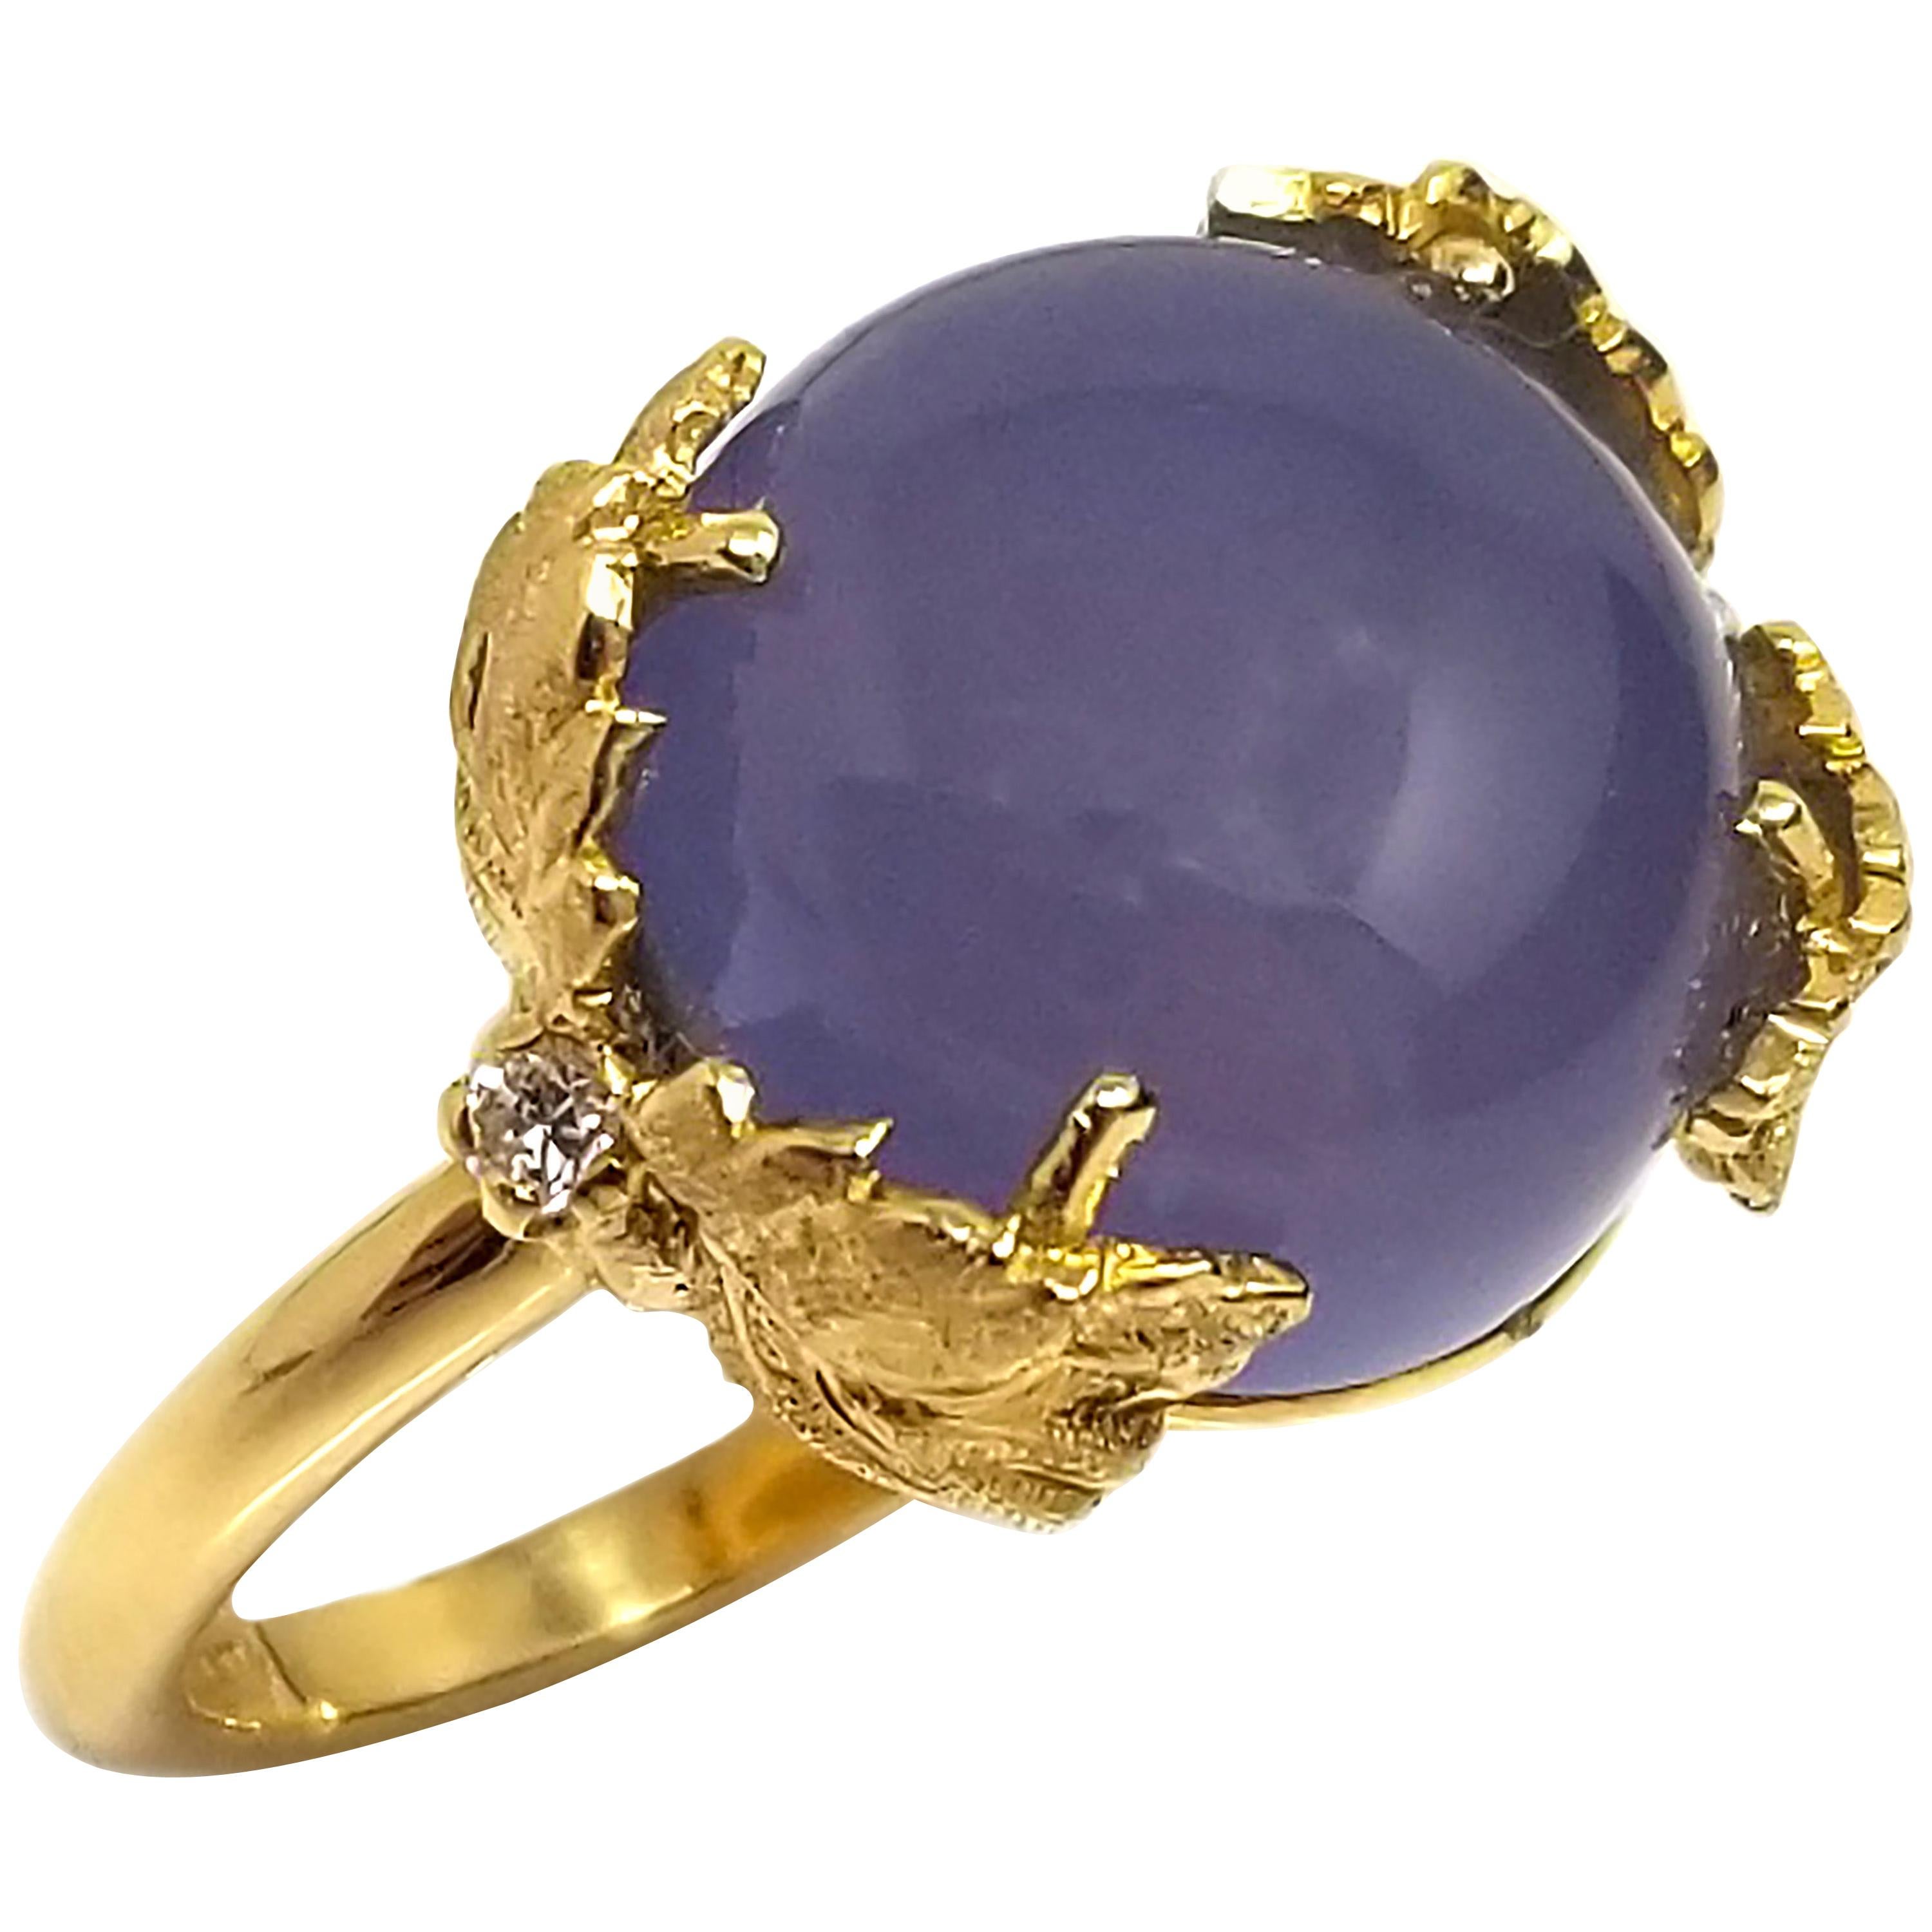 Cynthia Scott 6.28ct Namibian Chalcedony and 18kt Ring, Made in Italy